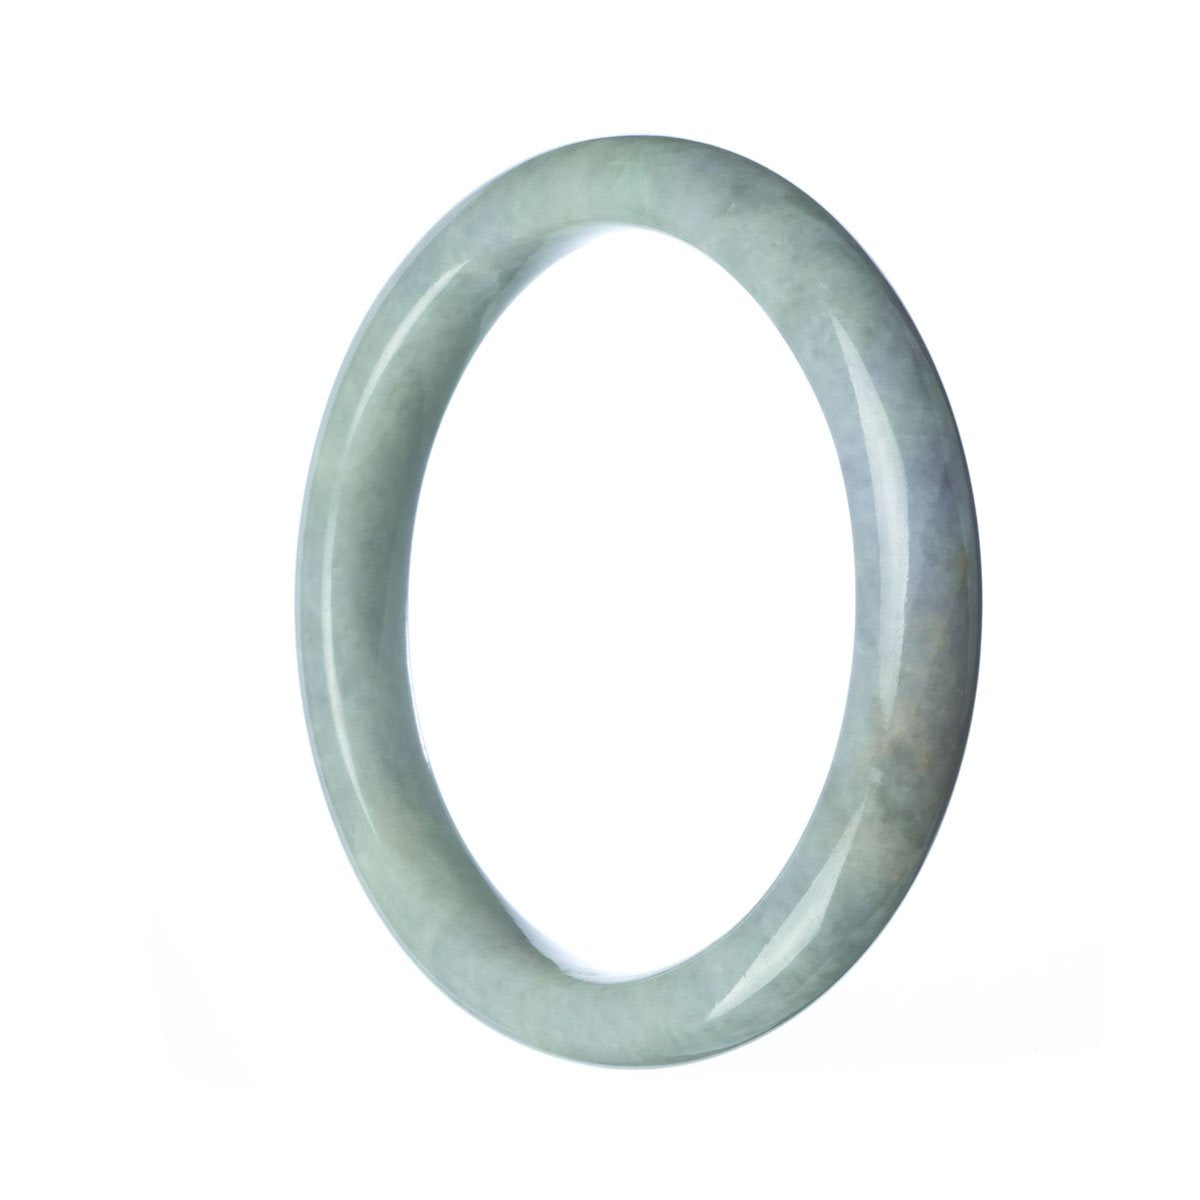 A close-up image of a beautiful, untreated lavender white jade bangle. The bangle is 62mm in size and has a semi-round shape. It is part of the MAYS™ collection.